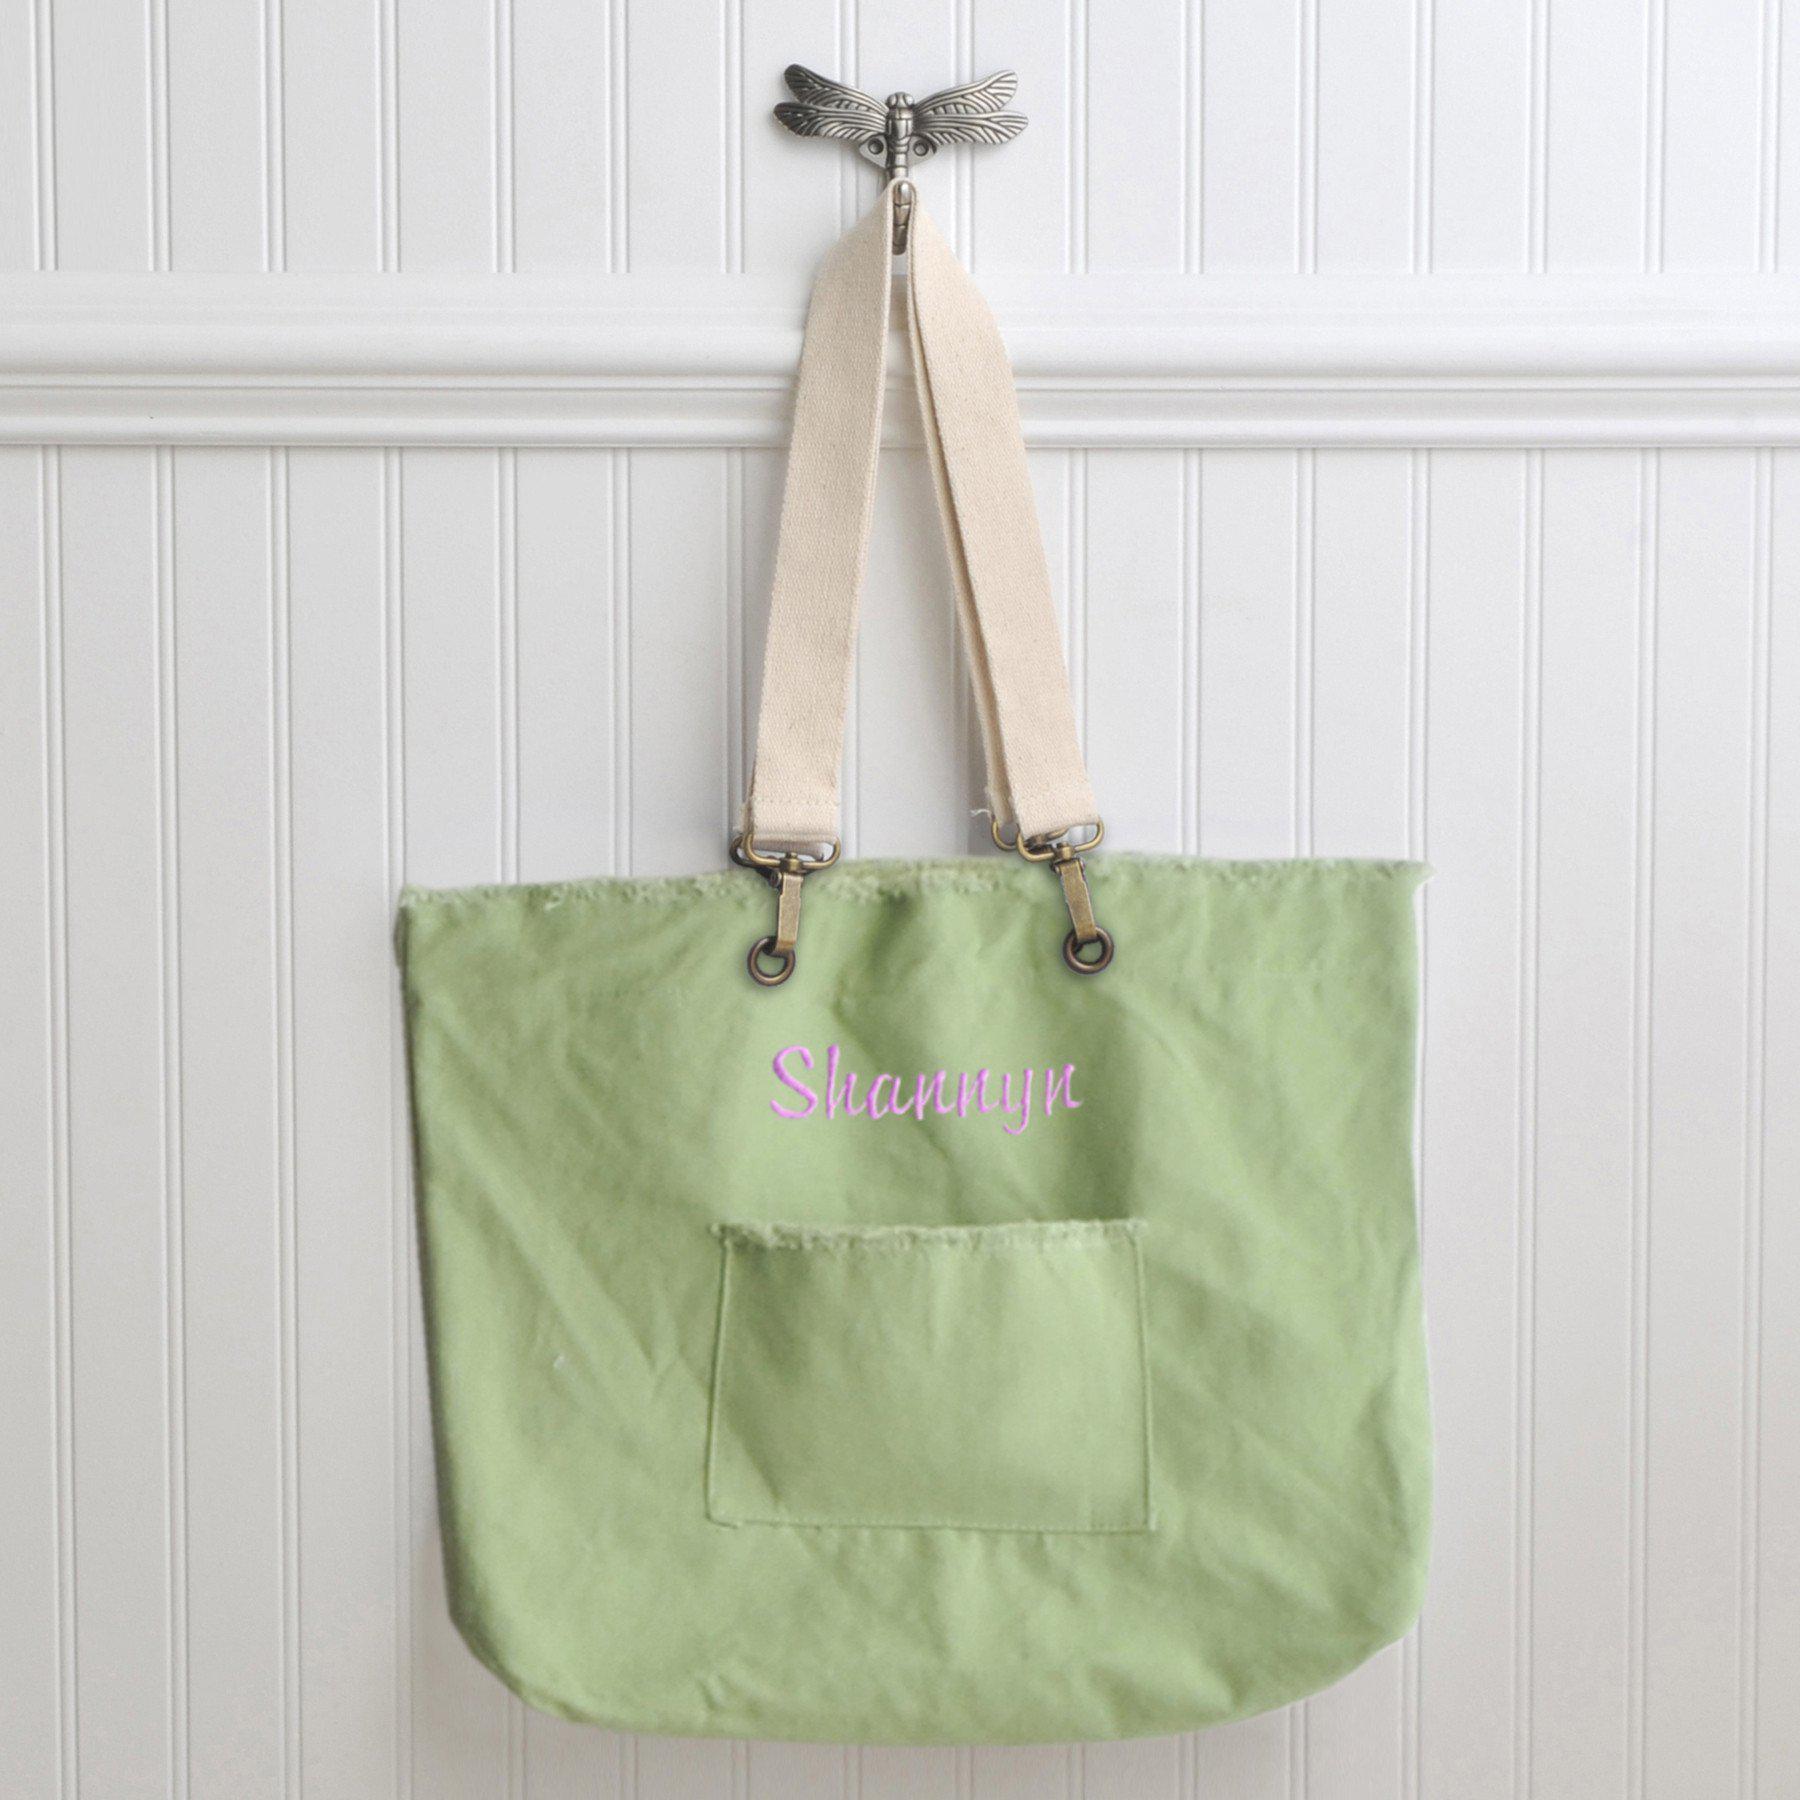 Personalized Canvas Tote Bag - Choose from 4 Colors